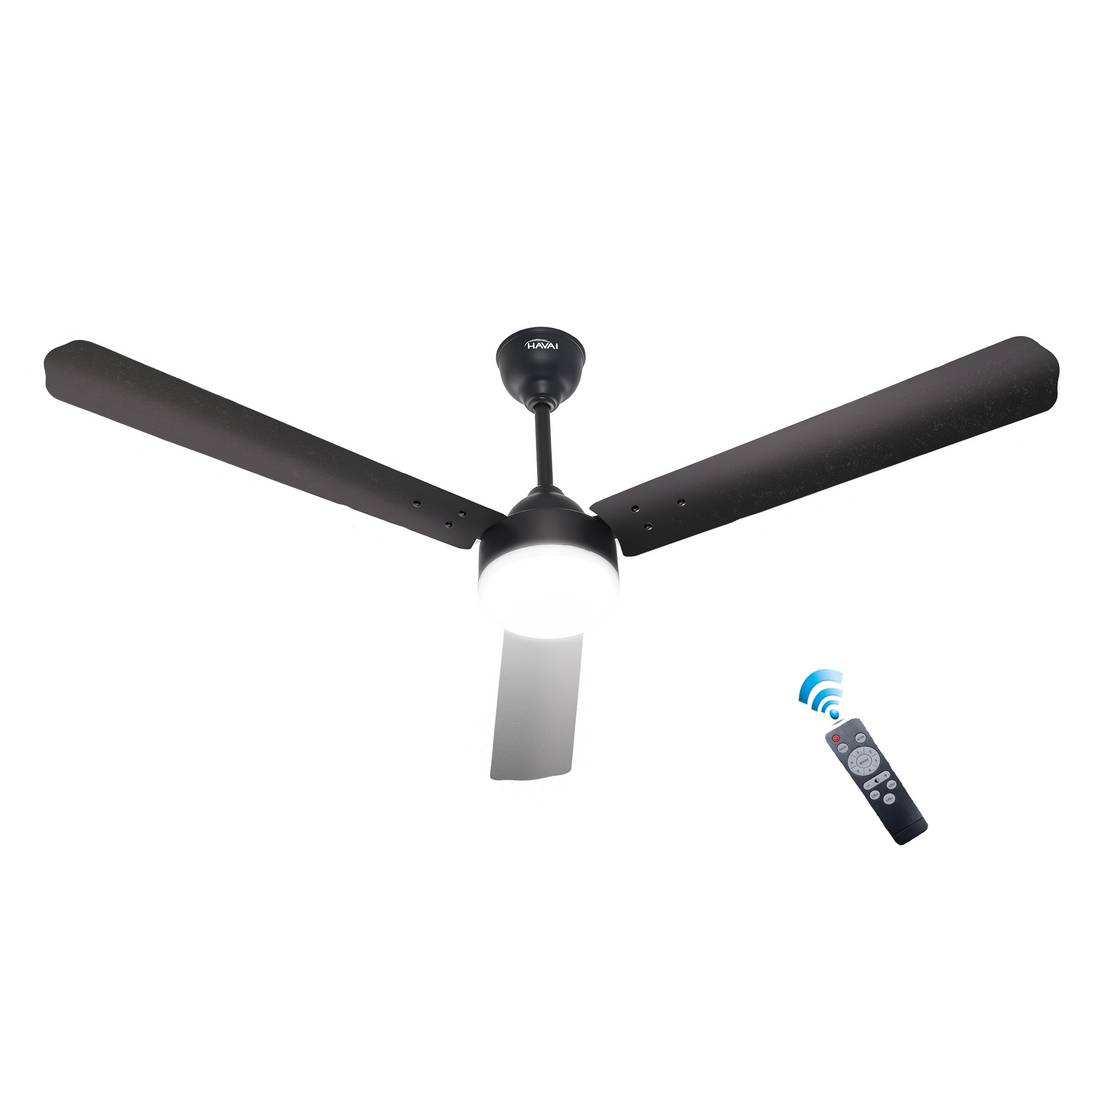 HAVAI Spinel BLDC Ceiling Fan 28W, 1200mm Blade with Remote - Smoky Brown,9W LED Light